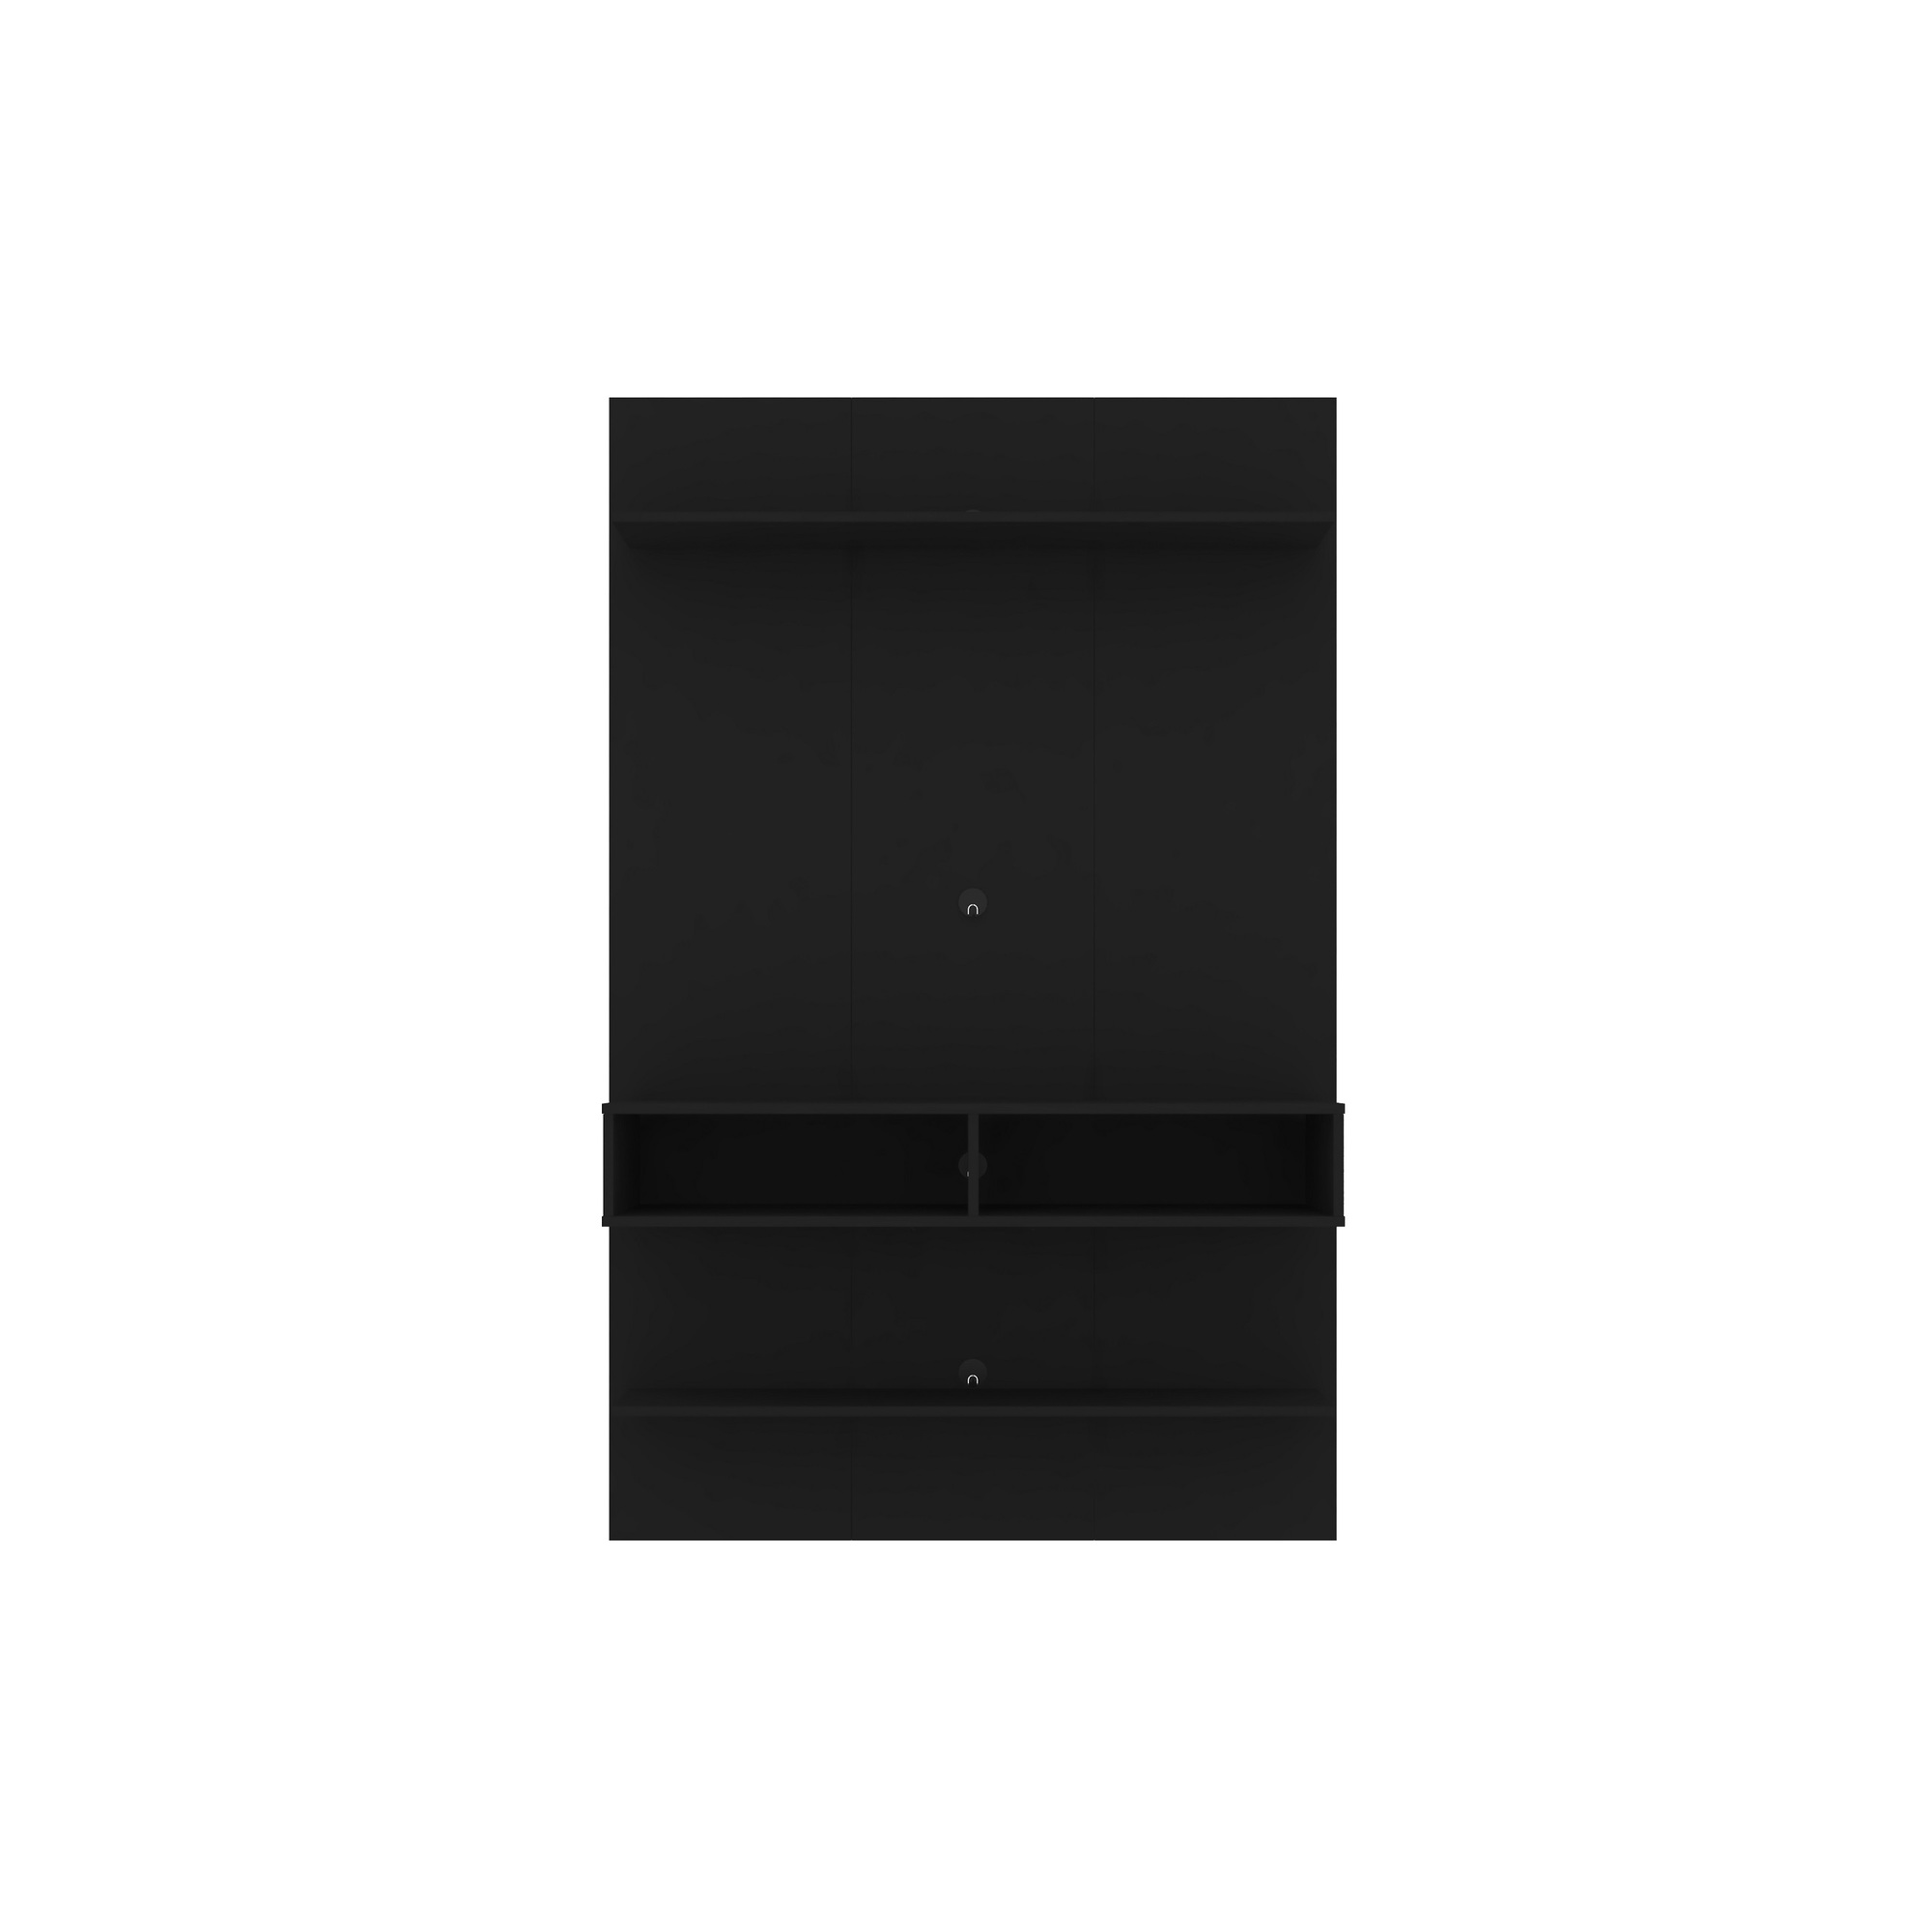 Manhattan Comfort, Libra Long Floating 45.35 Wall Ent Cntr Black, Width 45.35 in, Height 71.26 in, Depth 11.65 in, Model 237BMC